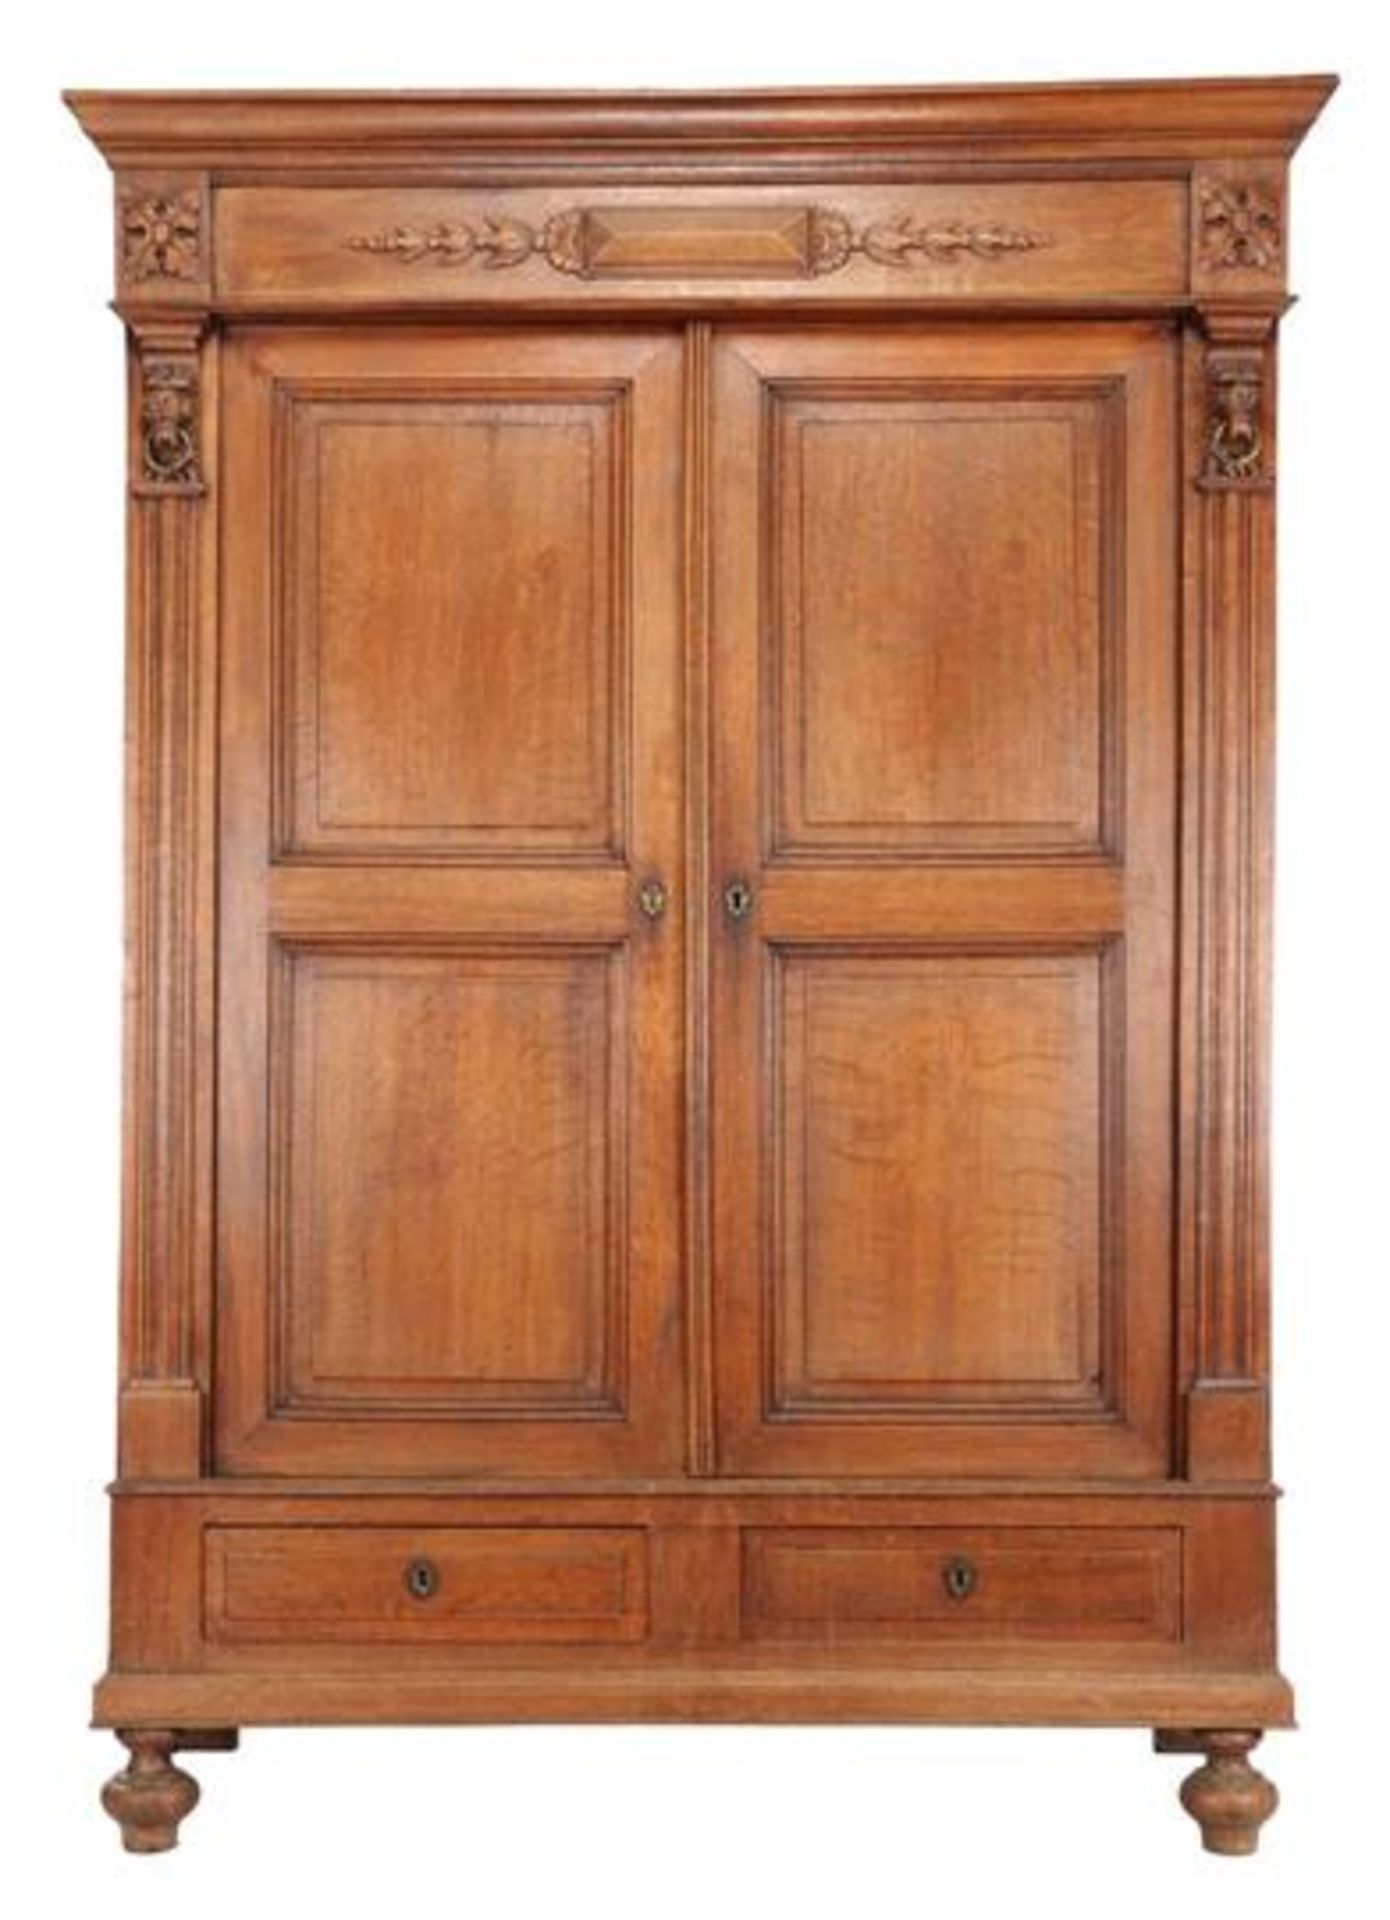 Oak 2-door cabinet with 2 drawers, lion masks, ornaments and profiled frames 216.5 cm high, 155 cm